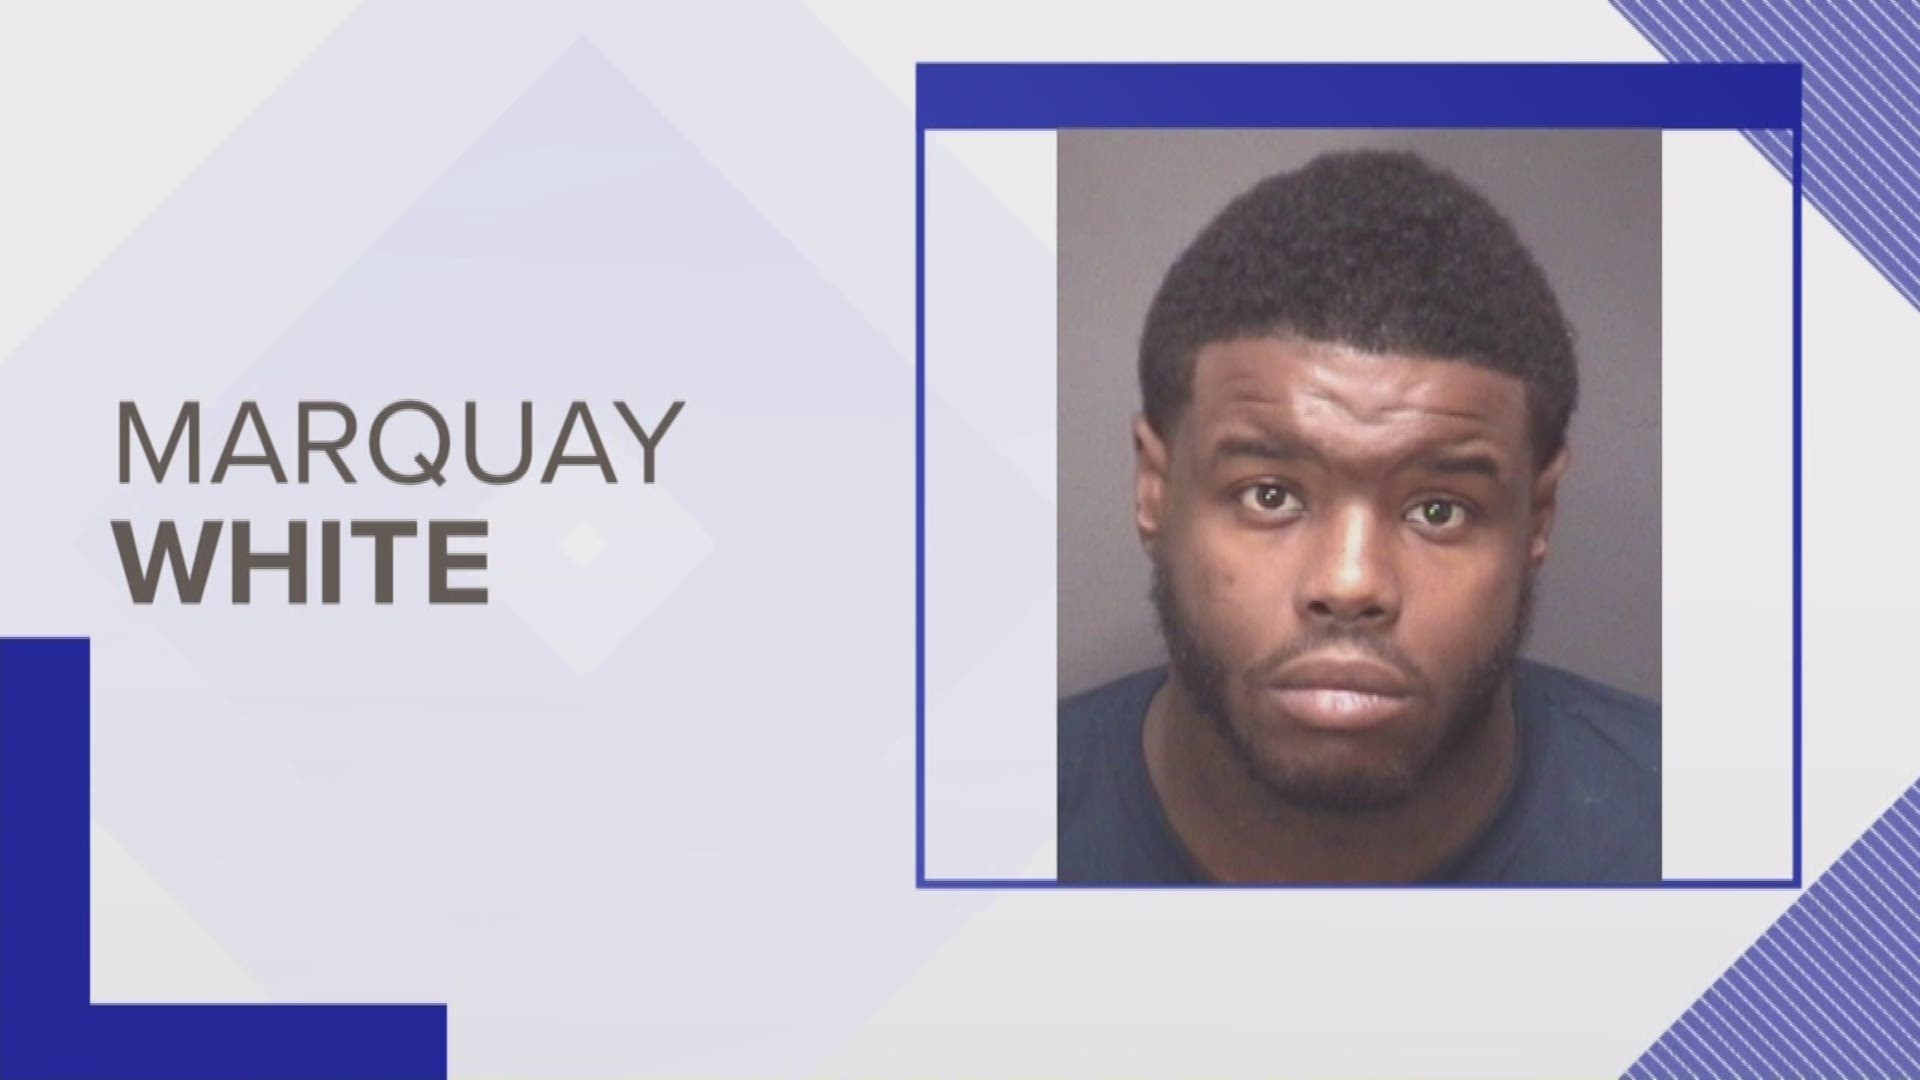 Suffolk police arrested Marquay White for the deadly shooting at the "Happy Shopper."